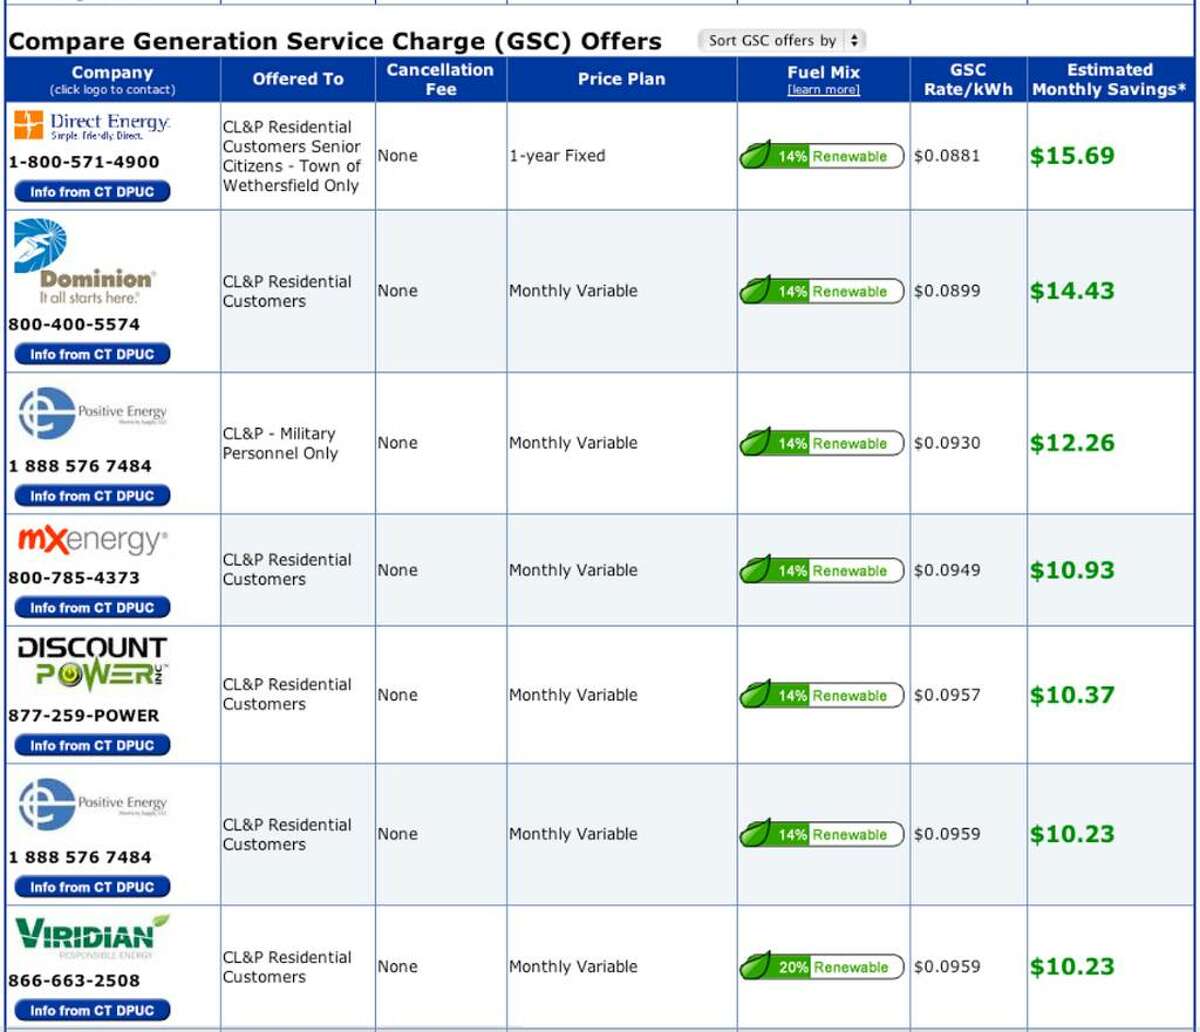 This screen capture shows a partial list of electricty marketers and rates available to Connecticut customers. In total, there are 13 suppliers and two dozen rates for residential electricity users in the state.